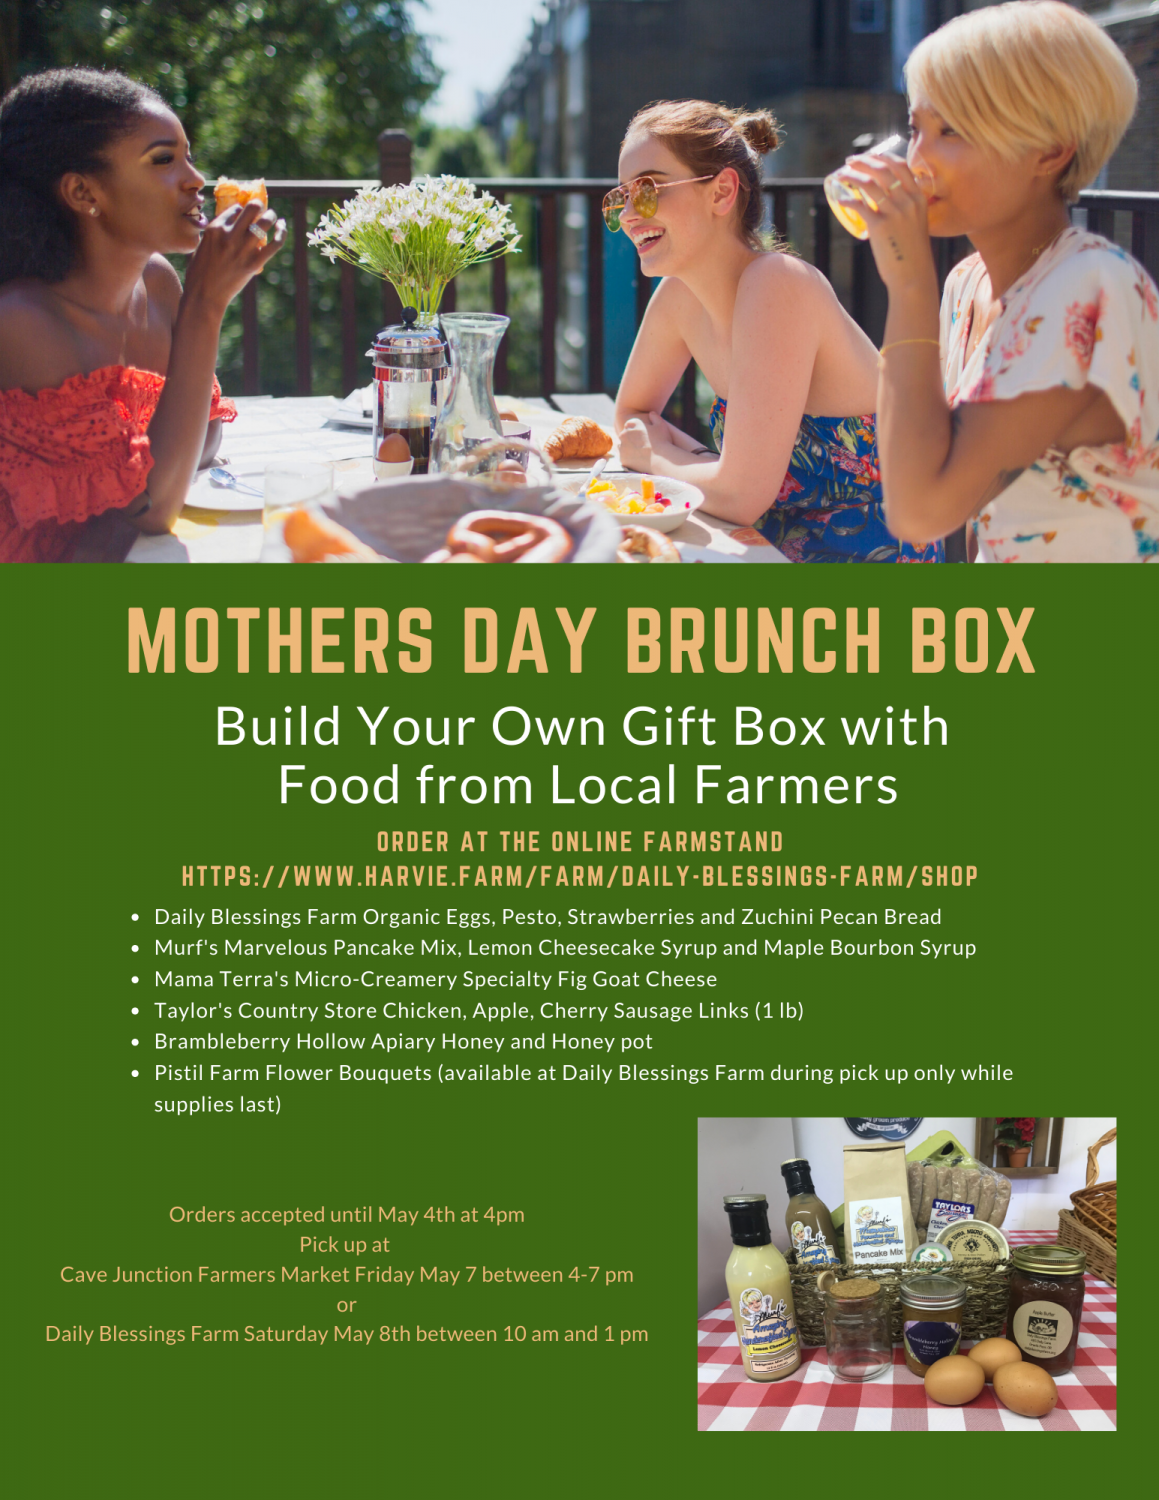 Next Happening: Order Your Mothers Day Brunch Box Today!